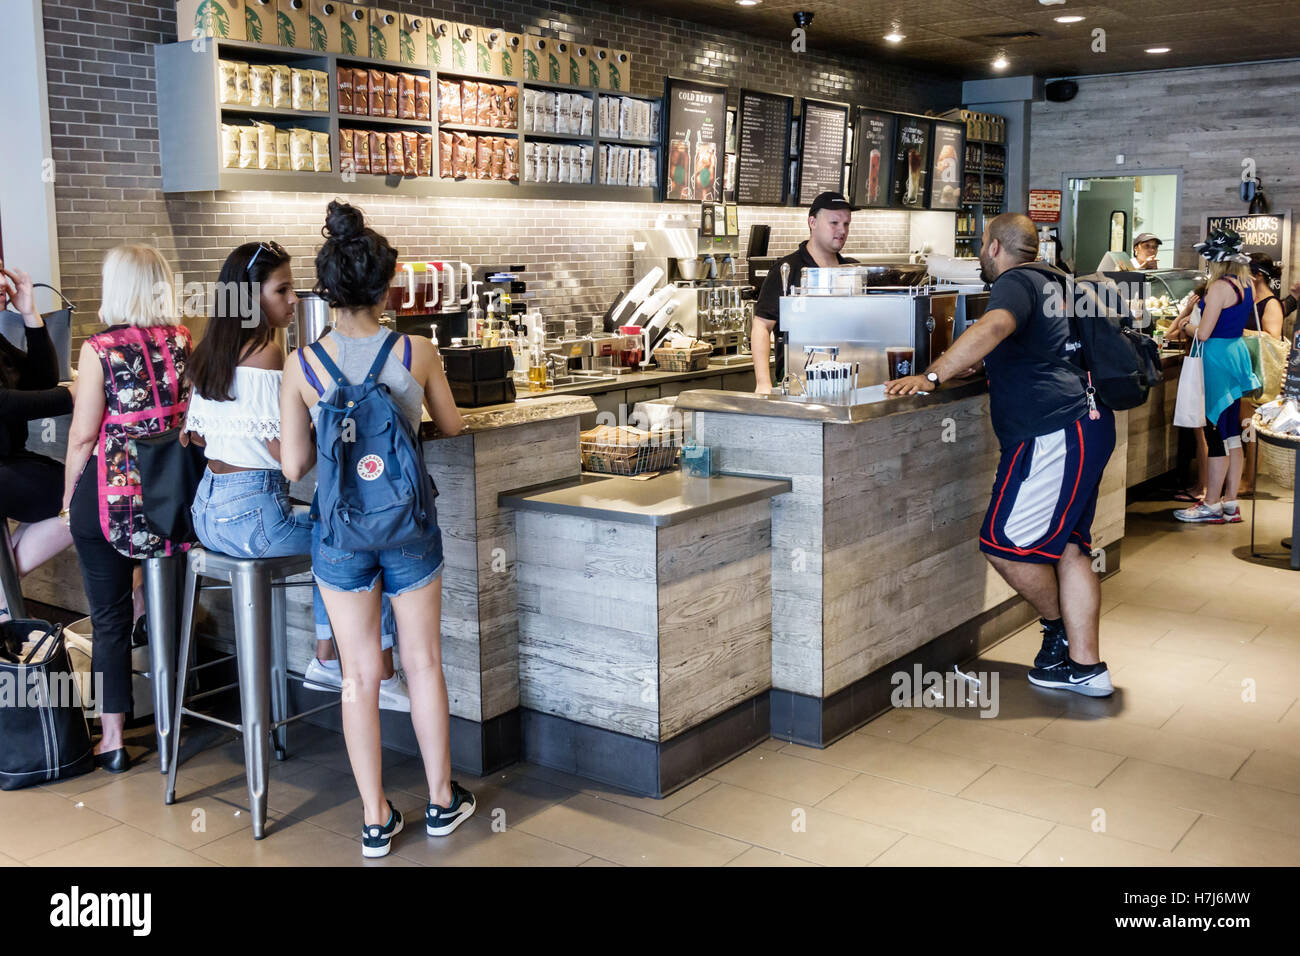 New York City,NY NYC Manhattan,Upper East Side,Starbucks Coffee,customers,counter,adult,adults,man men maschio,woman female women,barista,cassiere,Young a Foto Stock